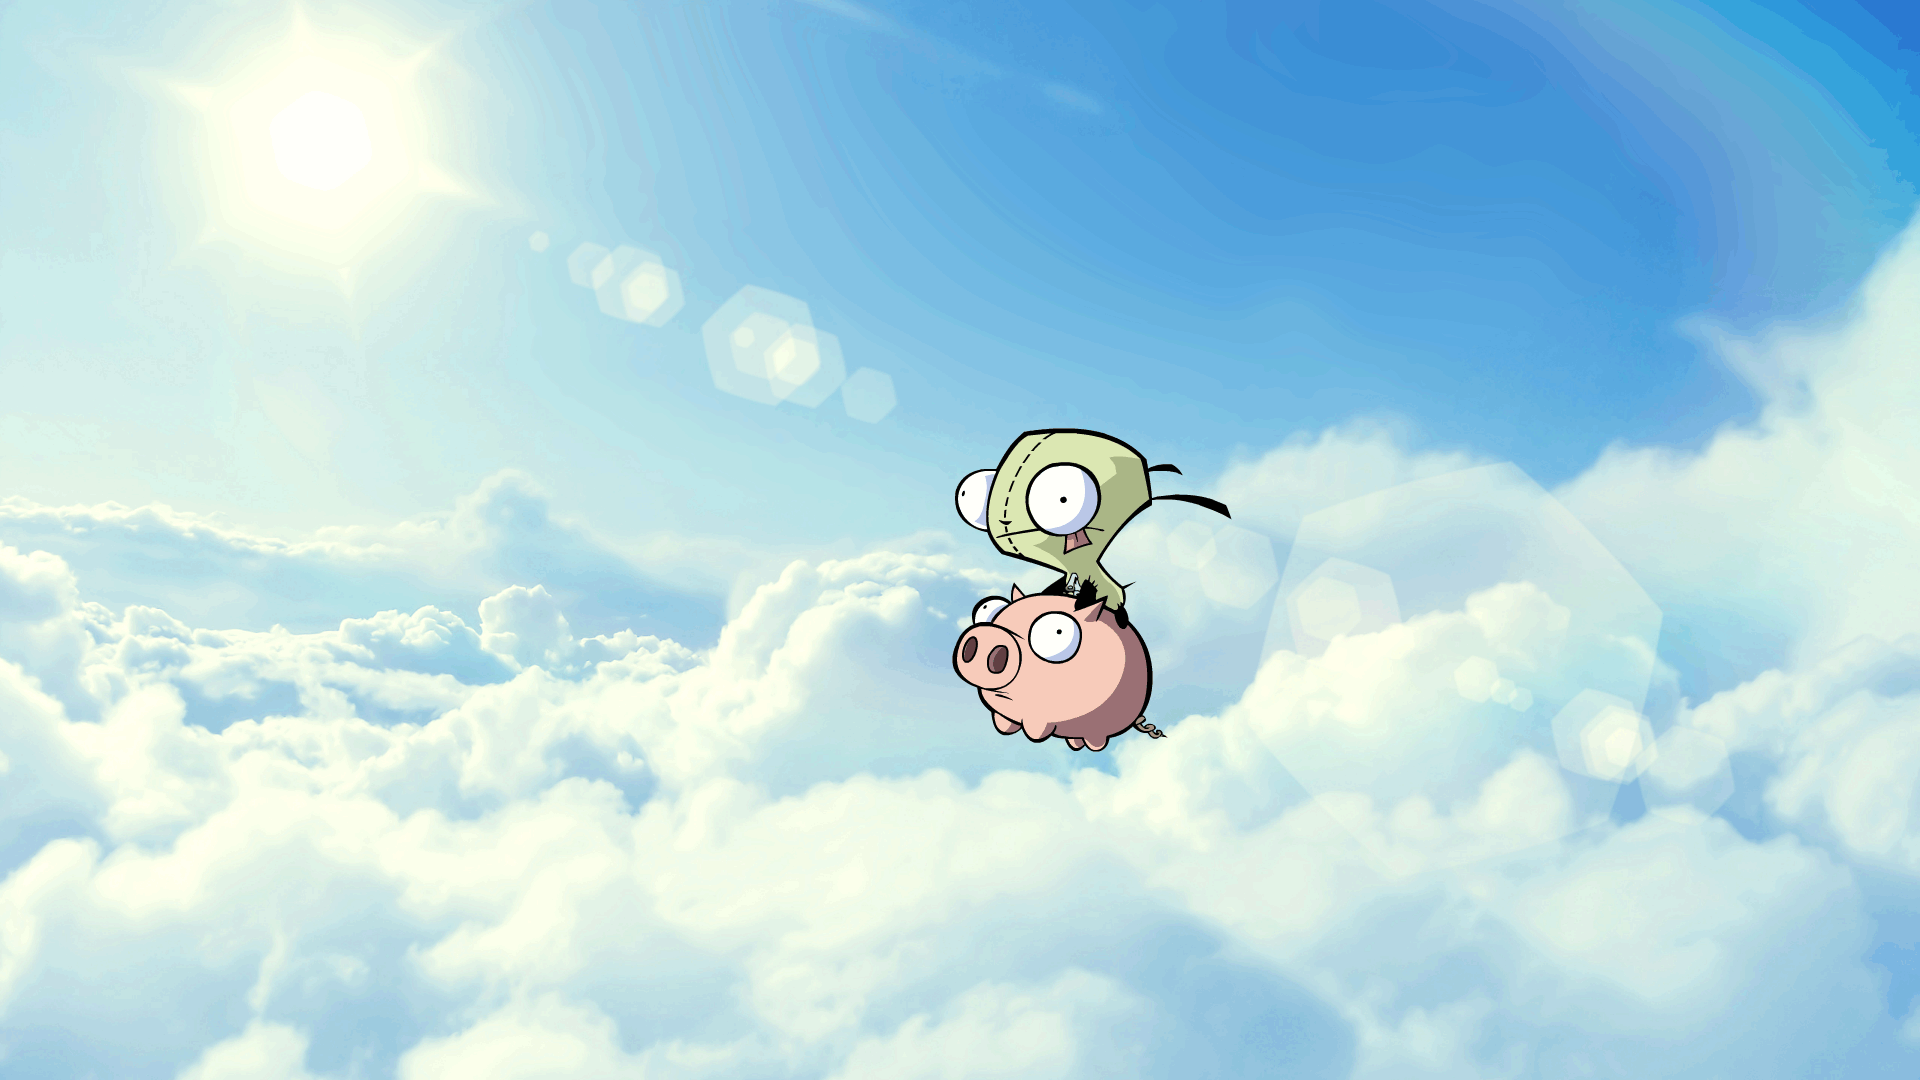 Ride The Pig - Invader Zim Pig Gif , HD Wallpaper & Backgrounds